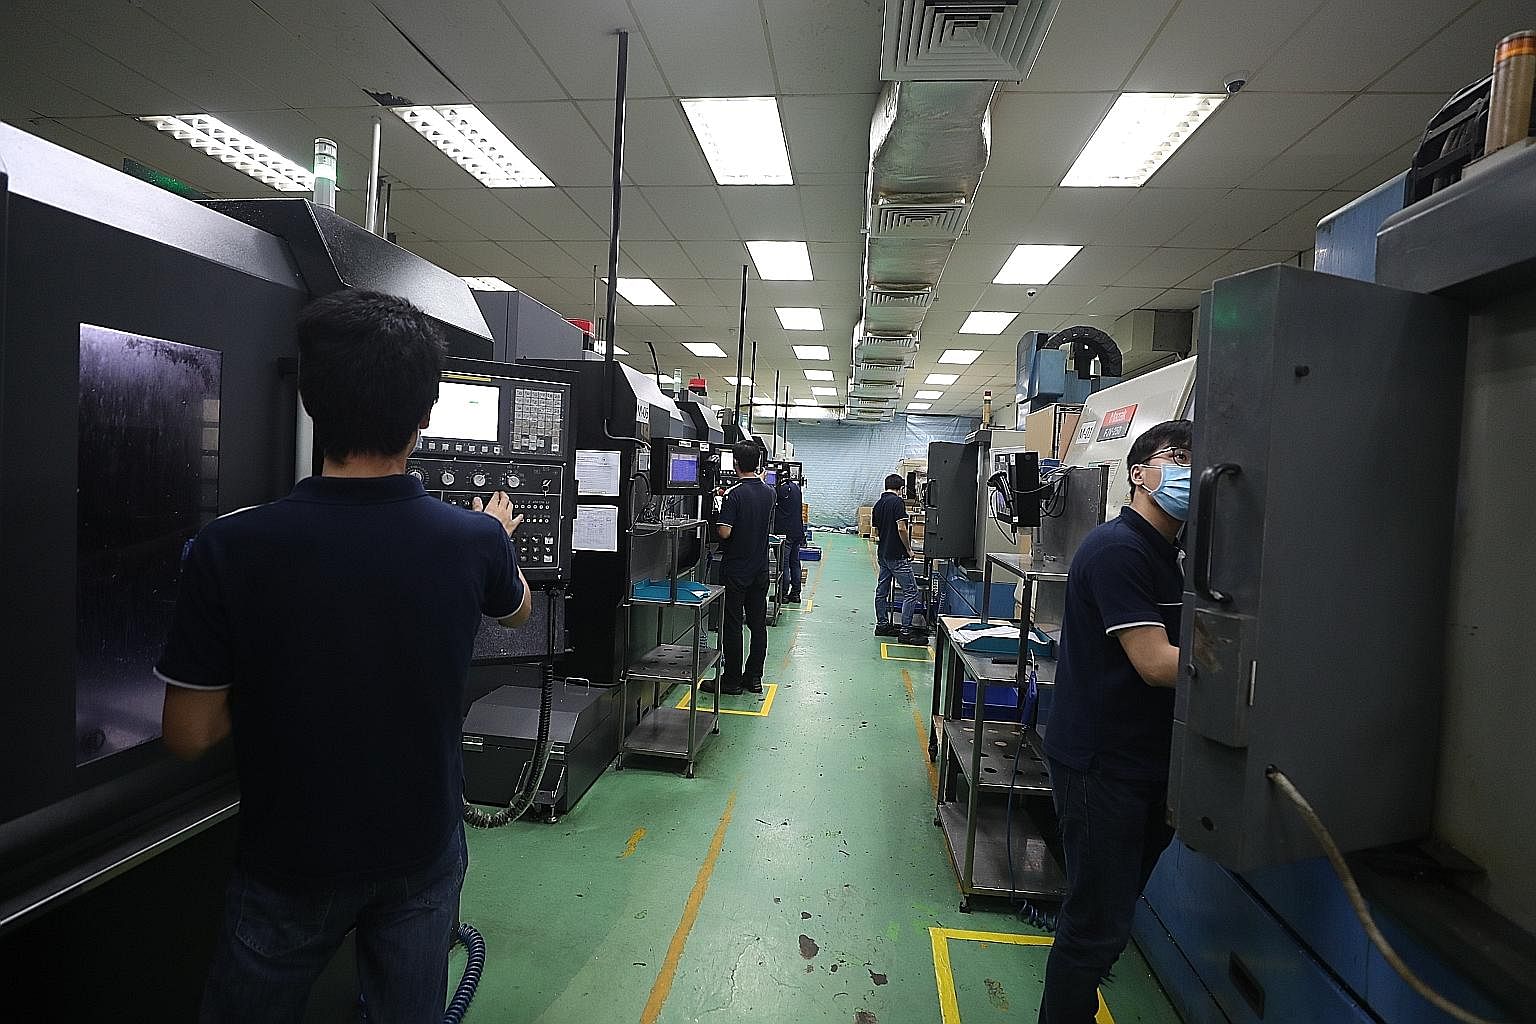 Safe distancing measures in place at Shine Precision Engineering. Social distancing and contact tracing are likely to be a big part of the day-to-day operations in firms for the long haul, says the writer. ST PHOTO: TIMOTHY DAVID